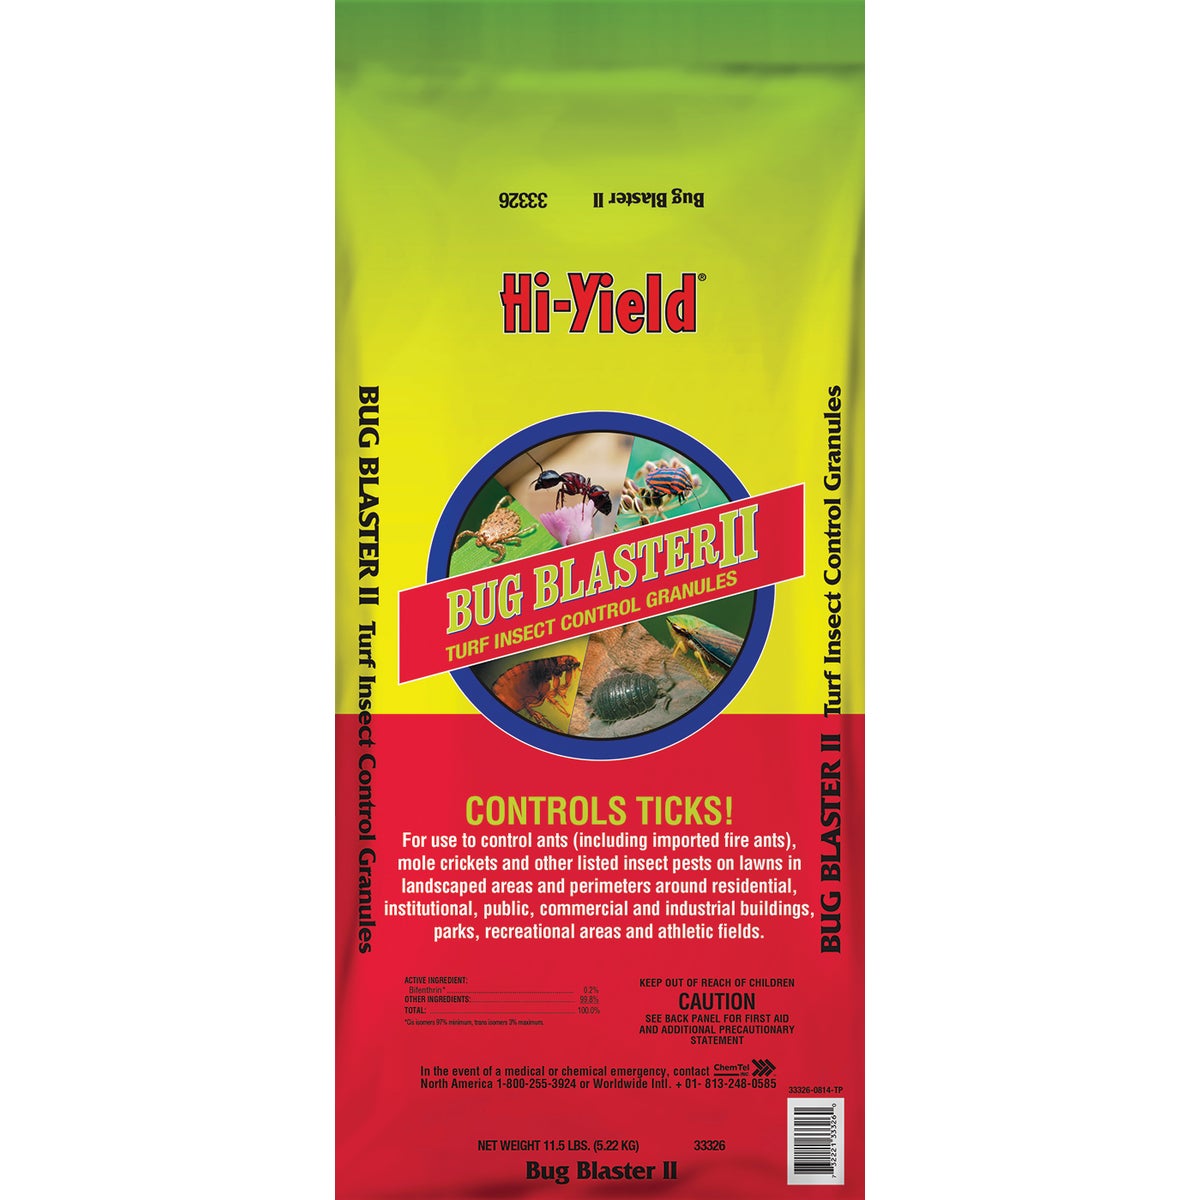 Item 702248, Bug Blaster II granules provides broad spectrum control of insect pests in 